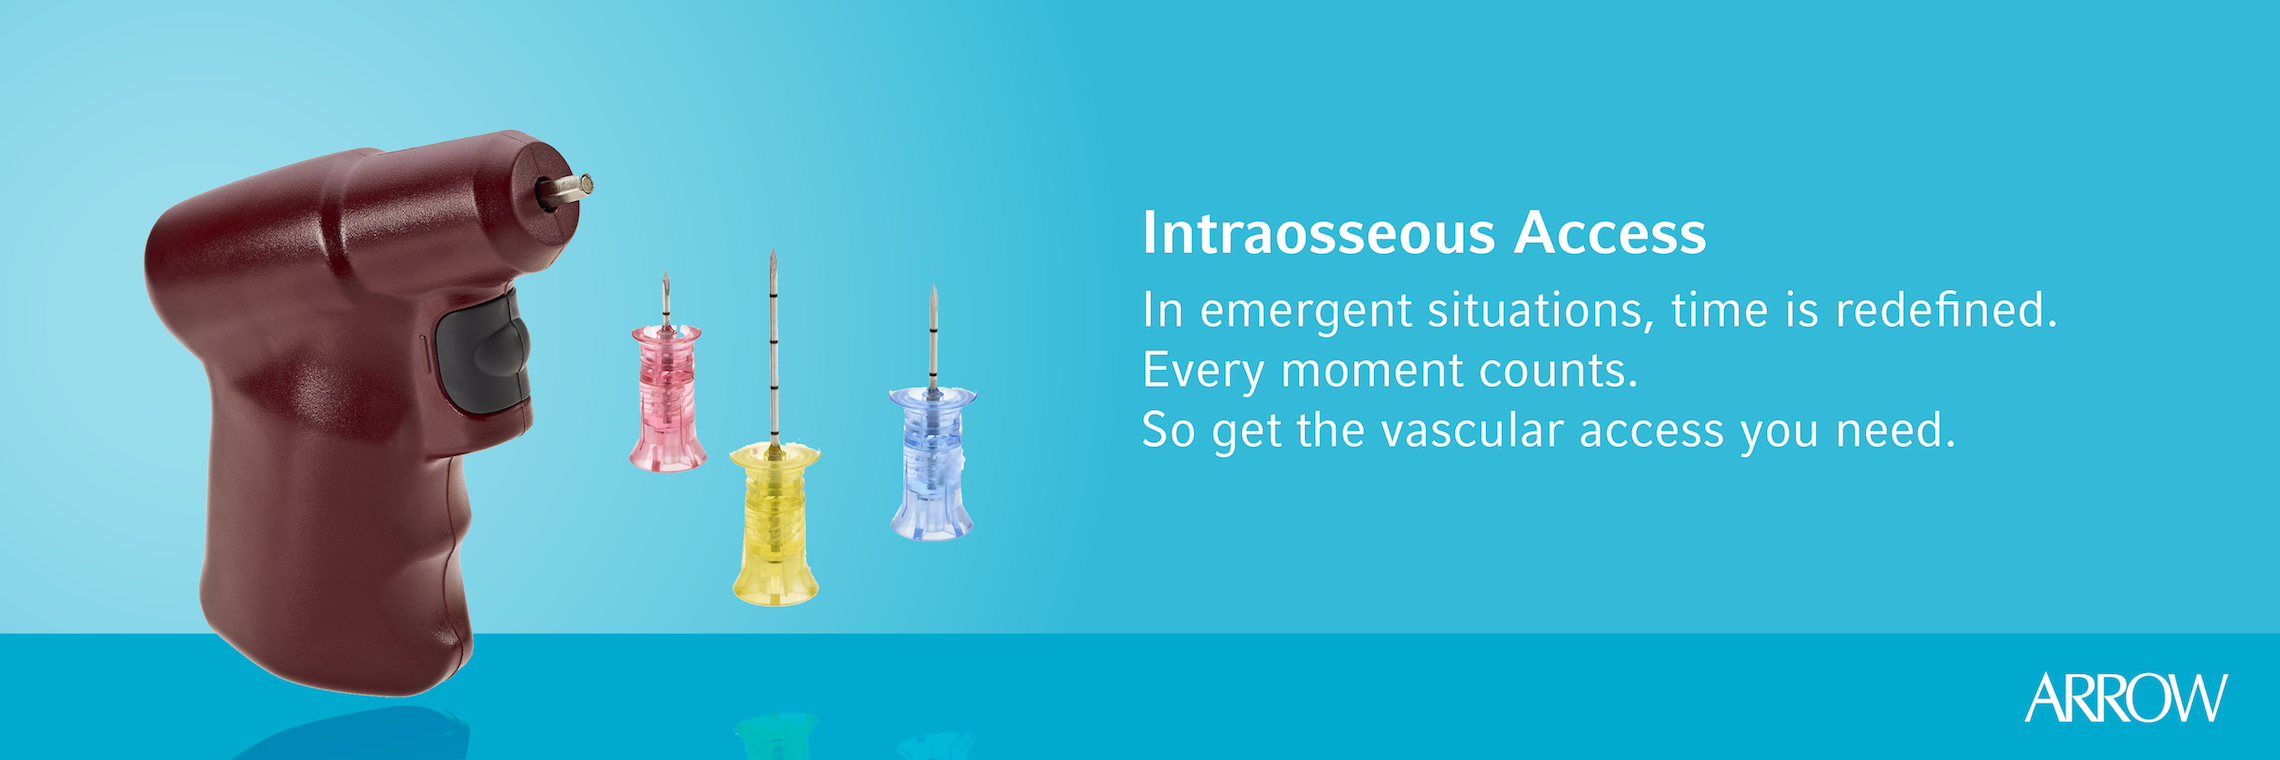 south africa - vascular access - 3 - english banner